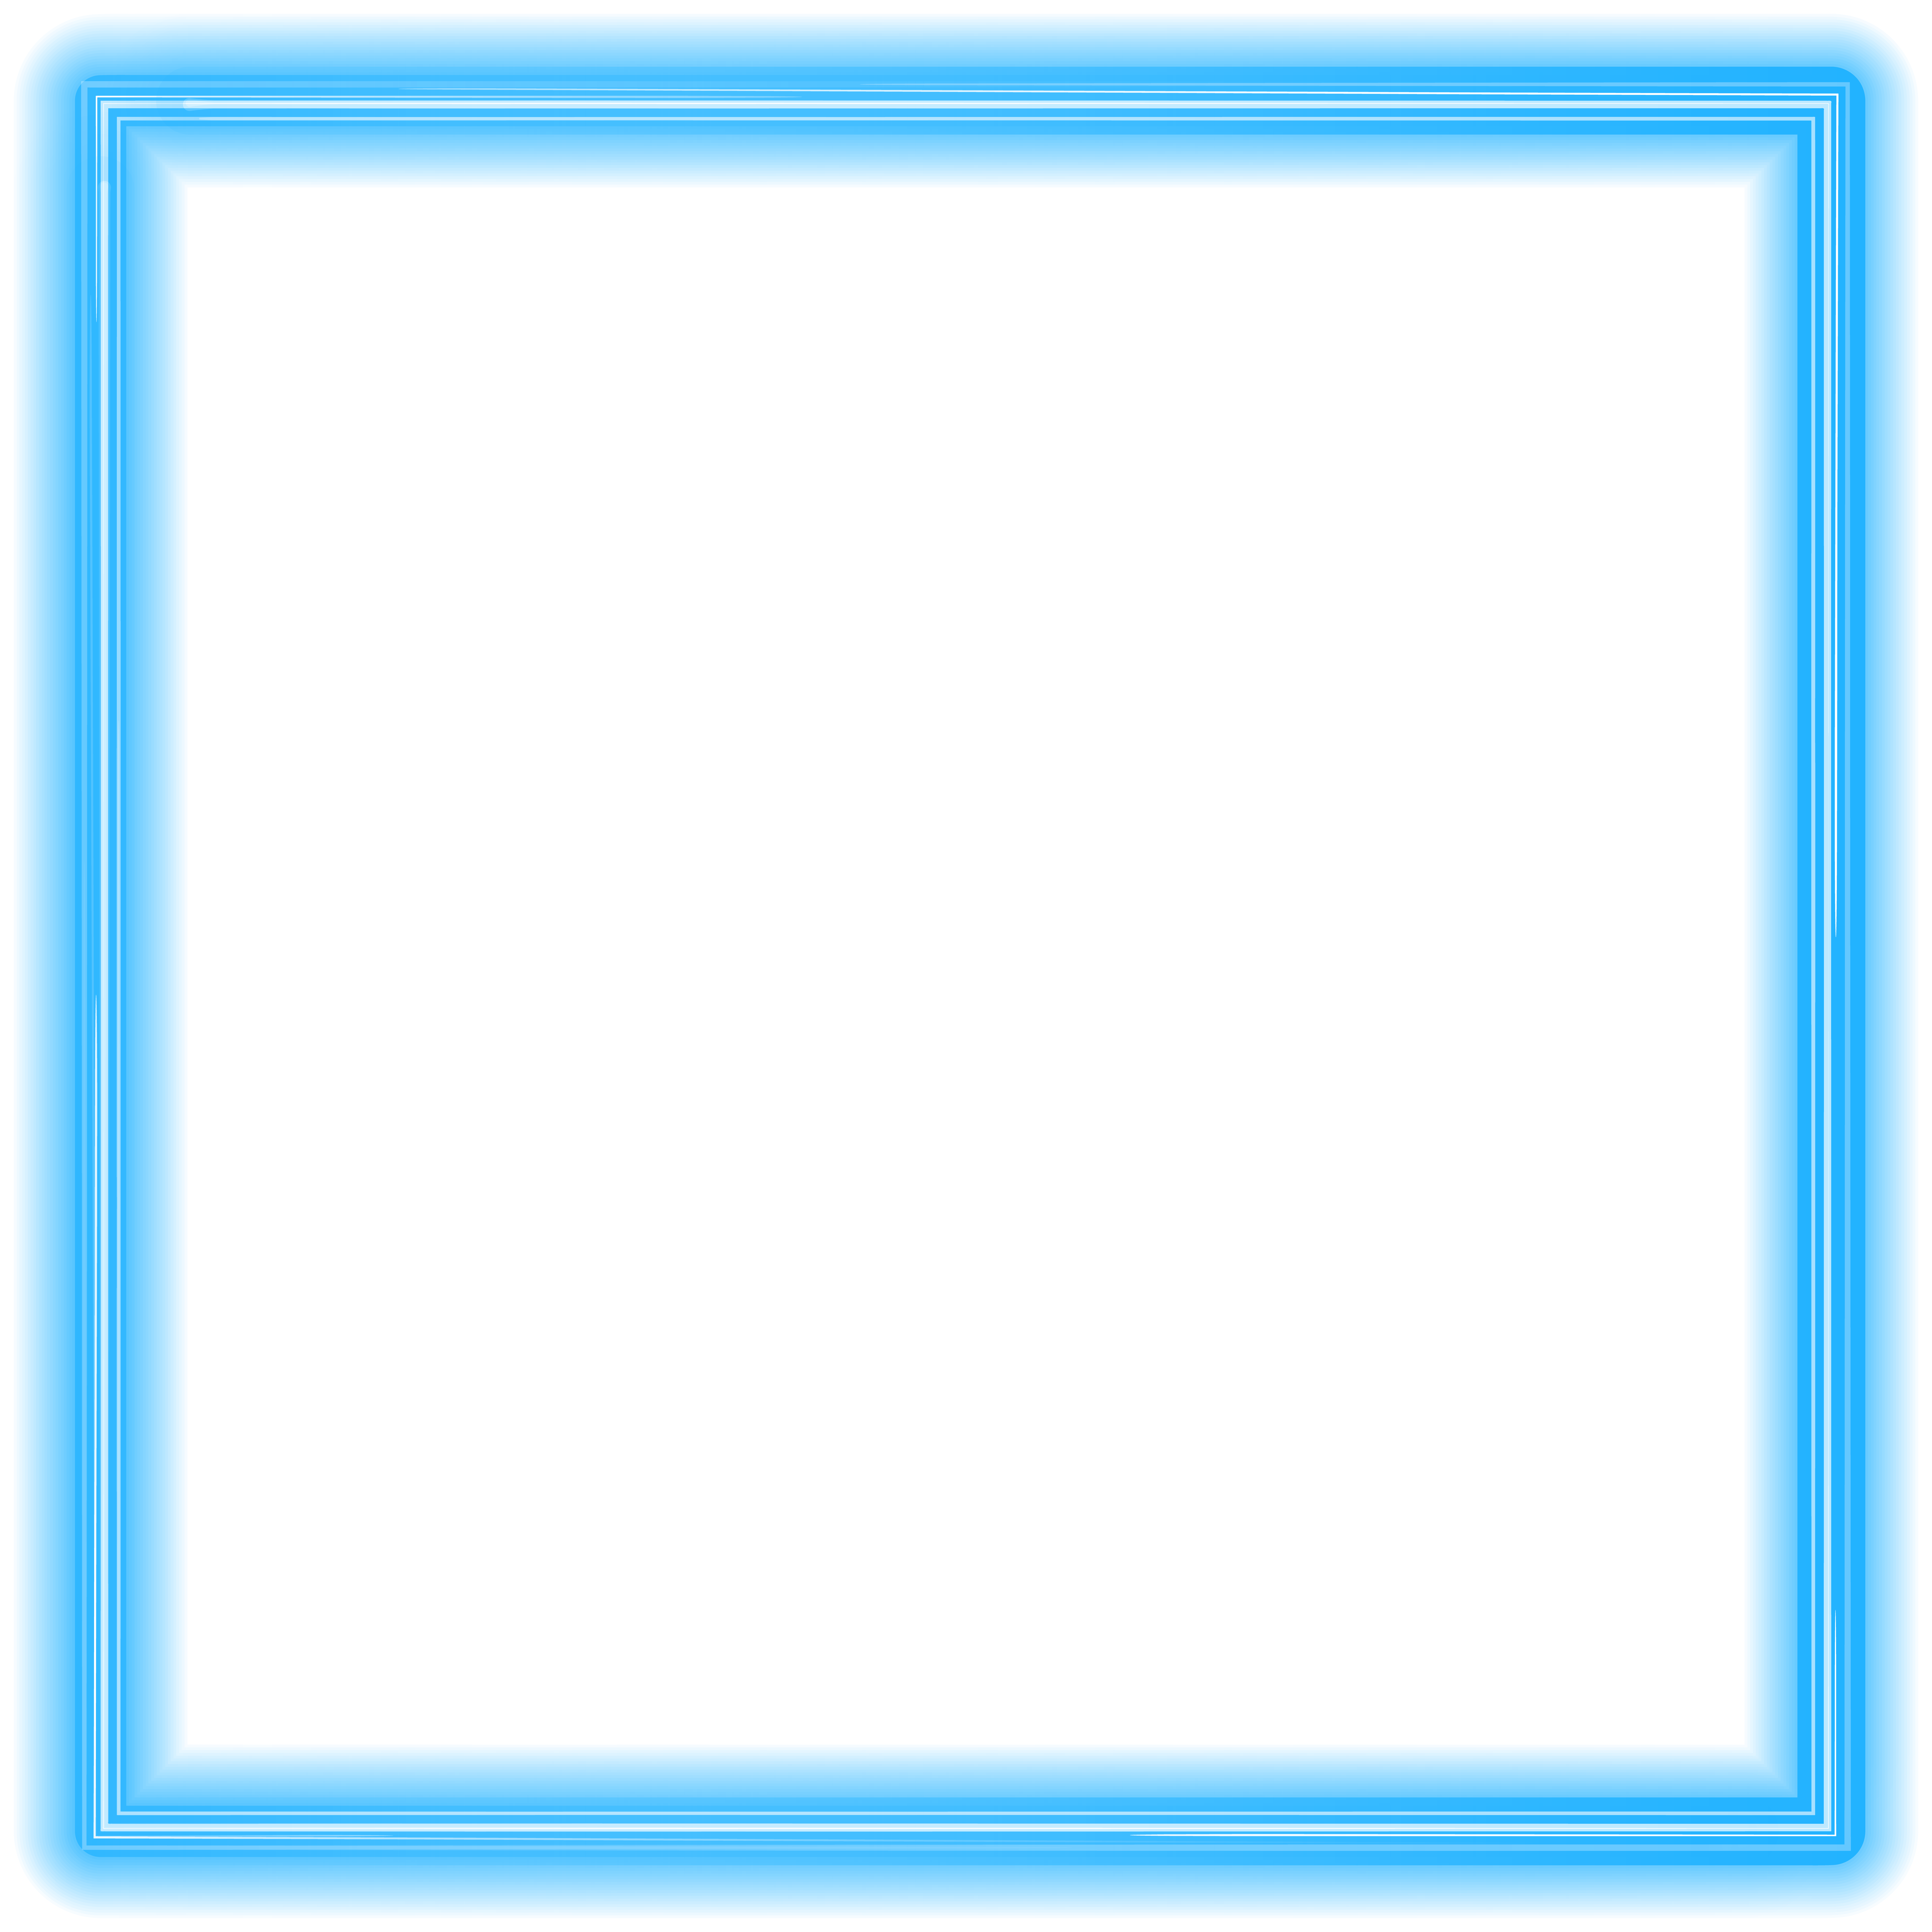 Blue Neon Border Frame PNG Clipart | Gallery Yopriceville - High ...